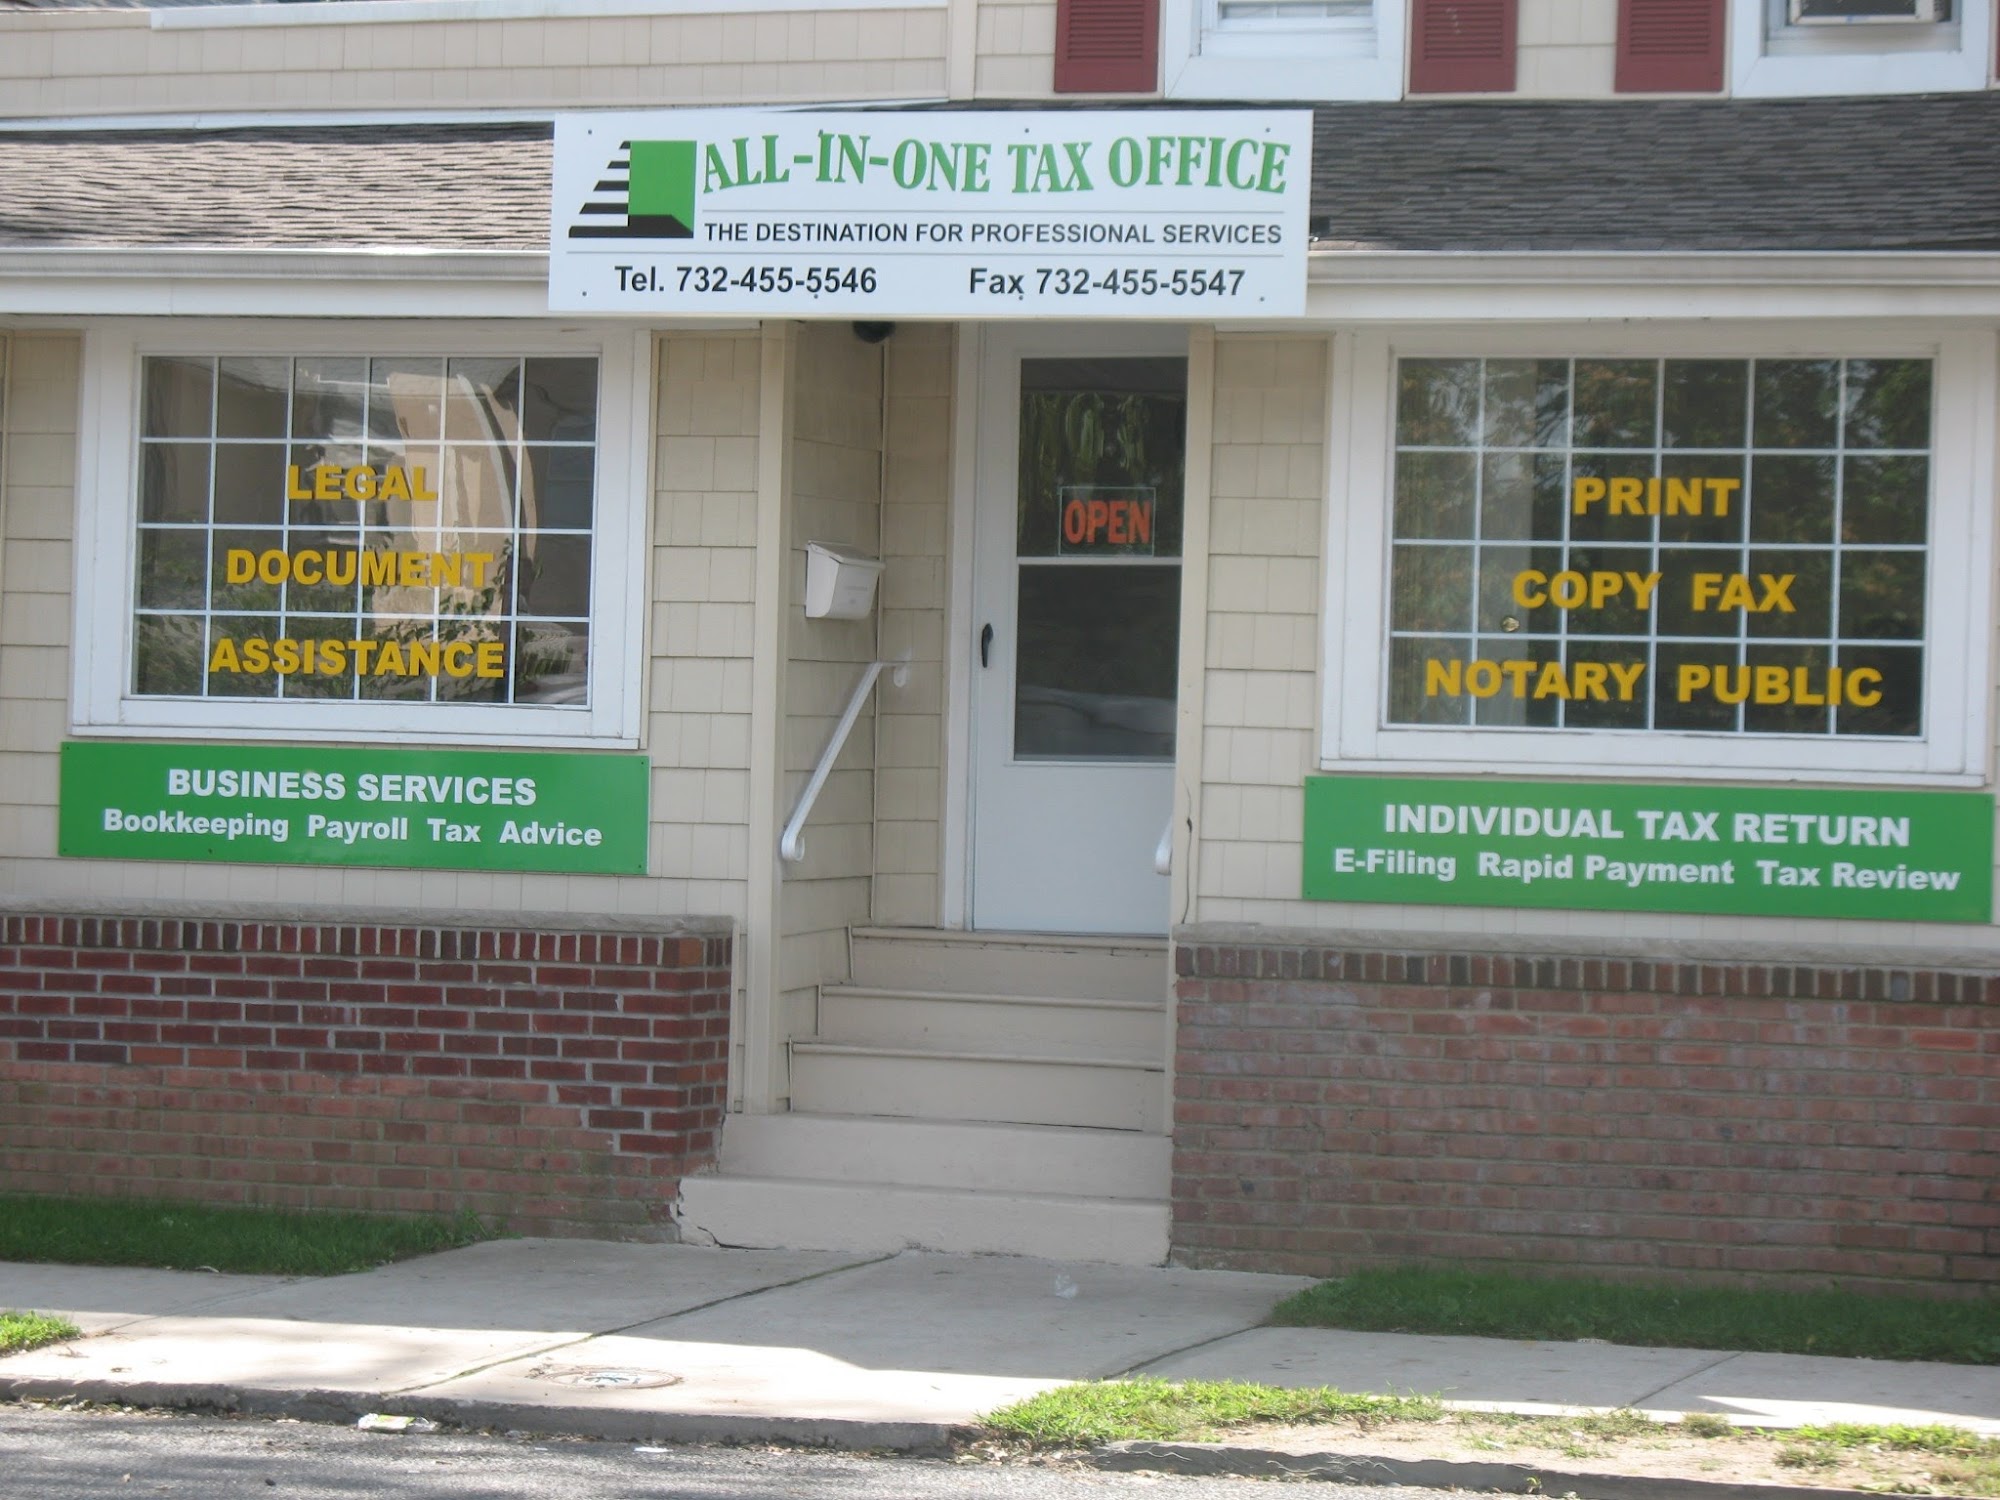 All-in-one Para Legal Service Provider 1310 Asbury Ave #2, Asbury Park New Jersey 07712